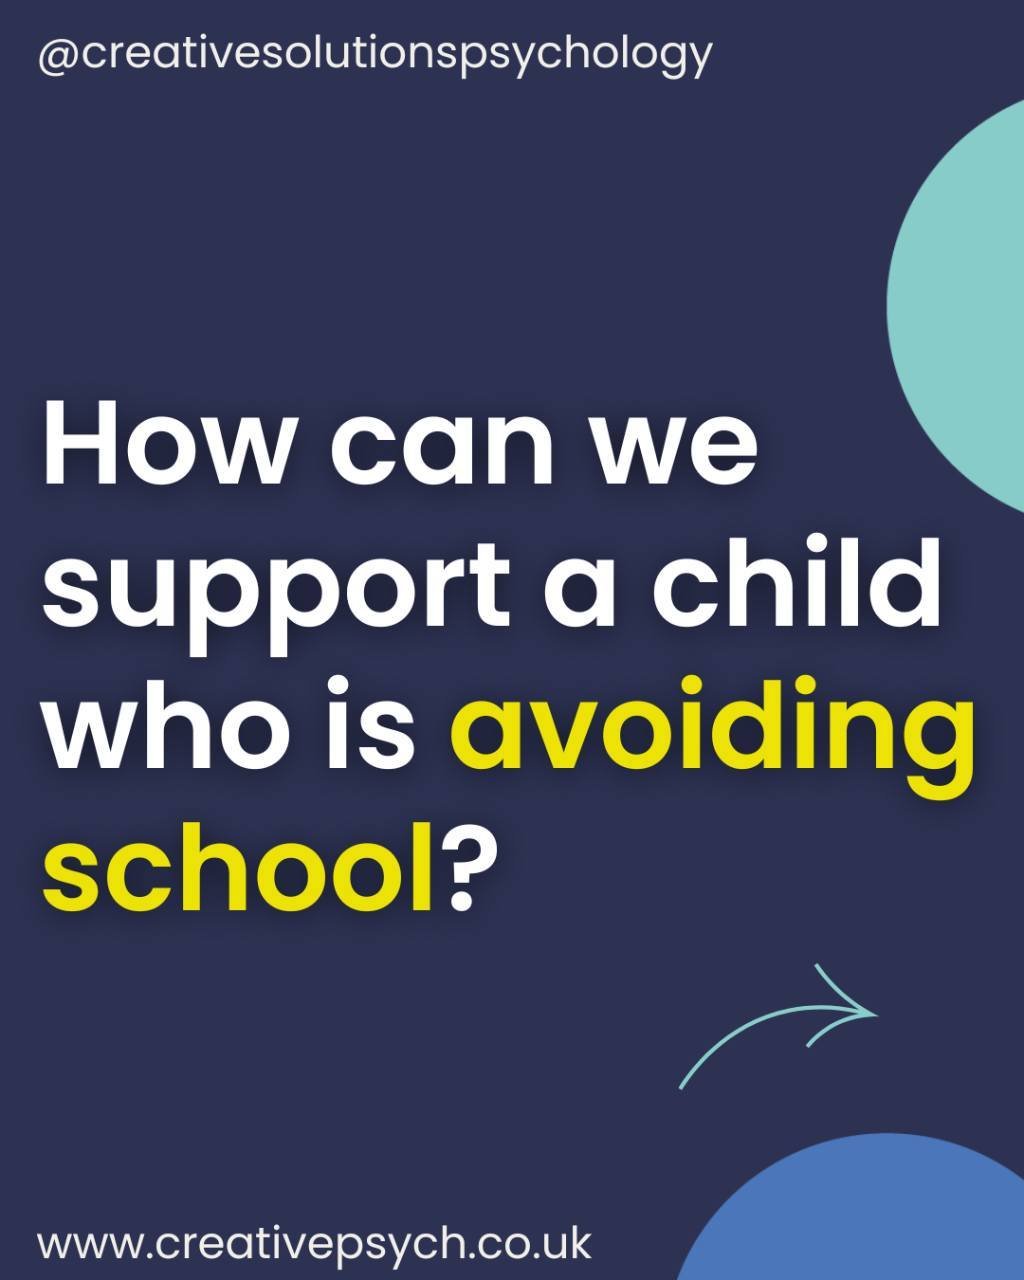 Addressing school avoidance involves peeling back layers to understand the core issues at play. 

School avoidance is not simply about a child not wanting to go to school; it's a signal of deeper challenges, be it anxiety, academic struggles, bullyin